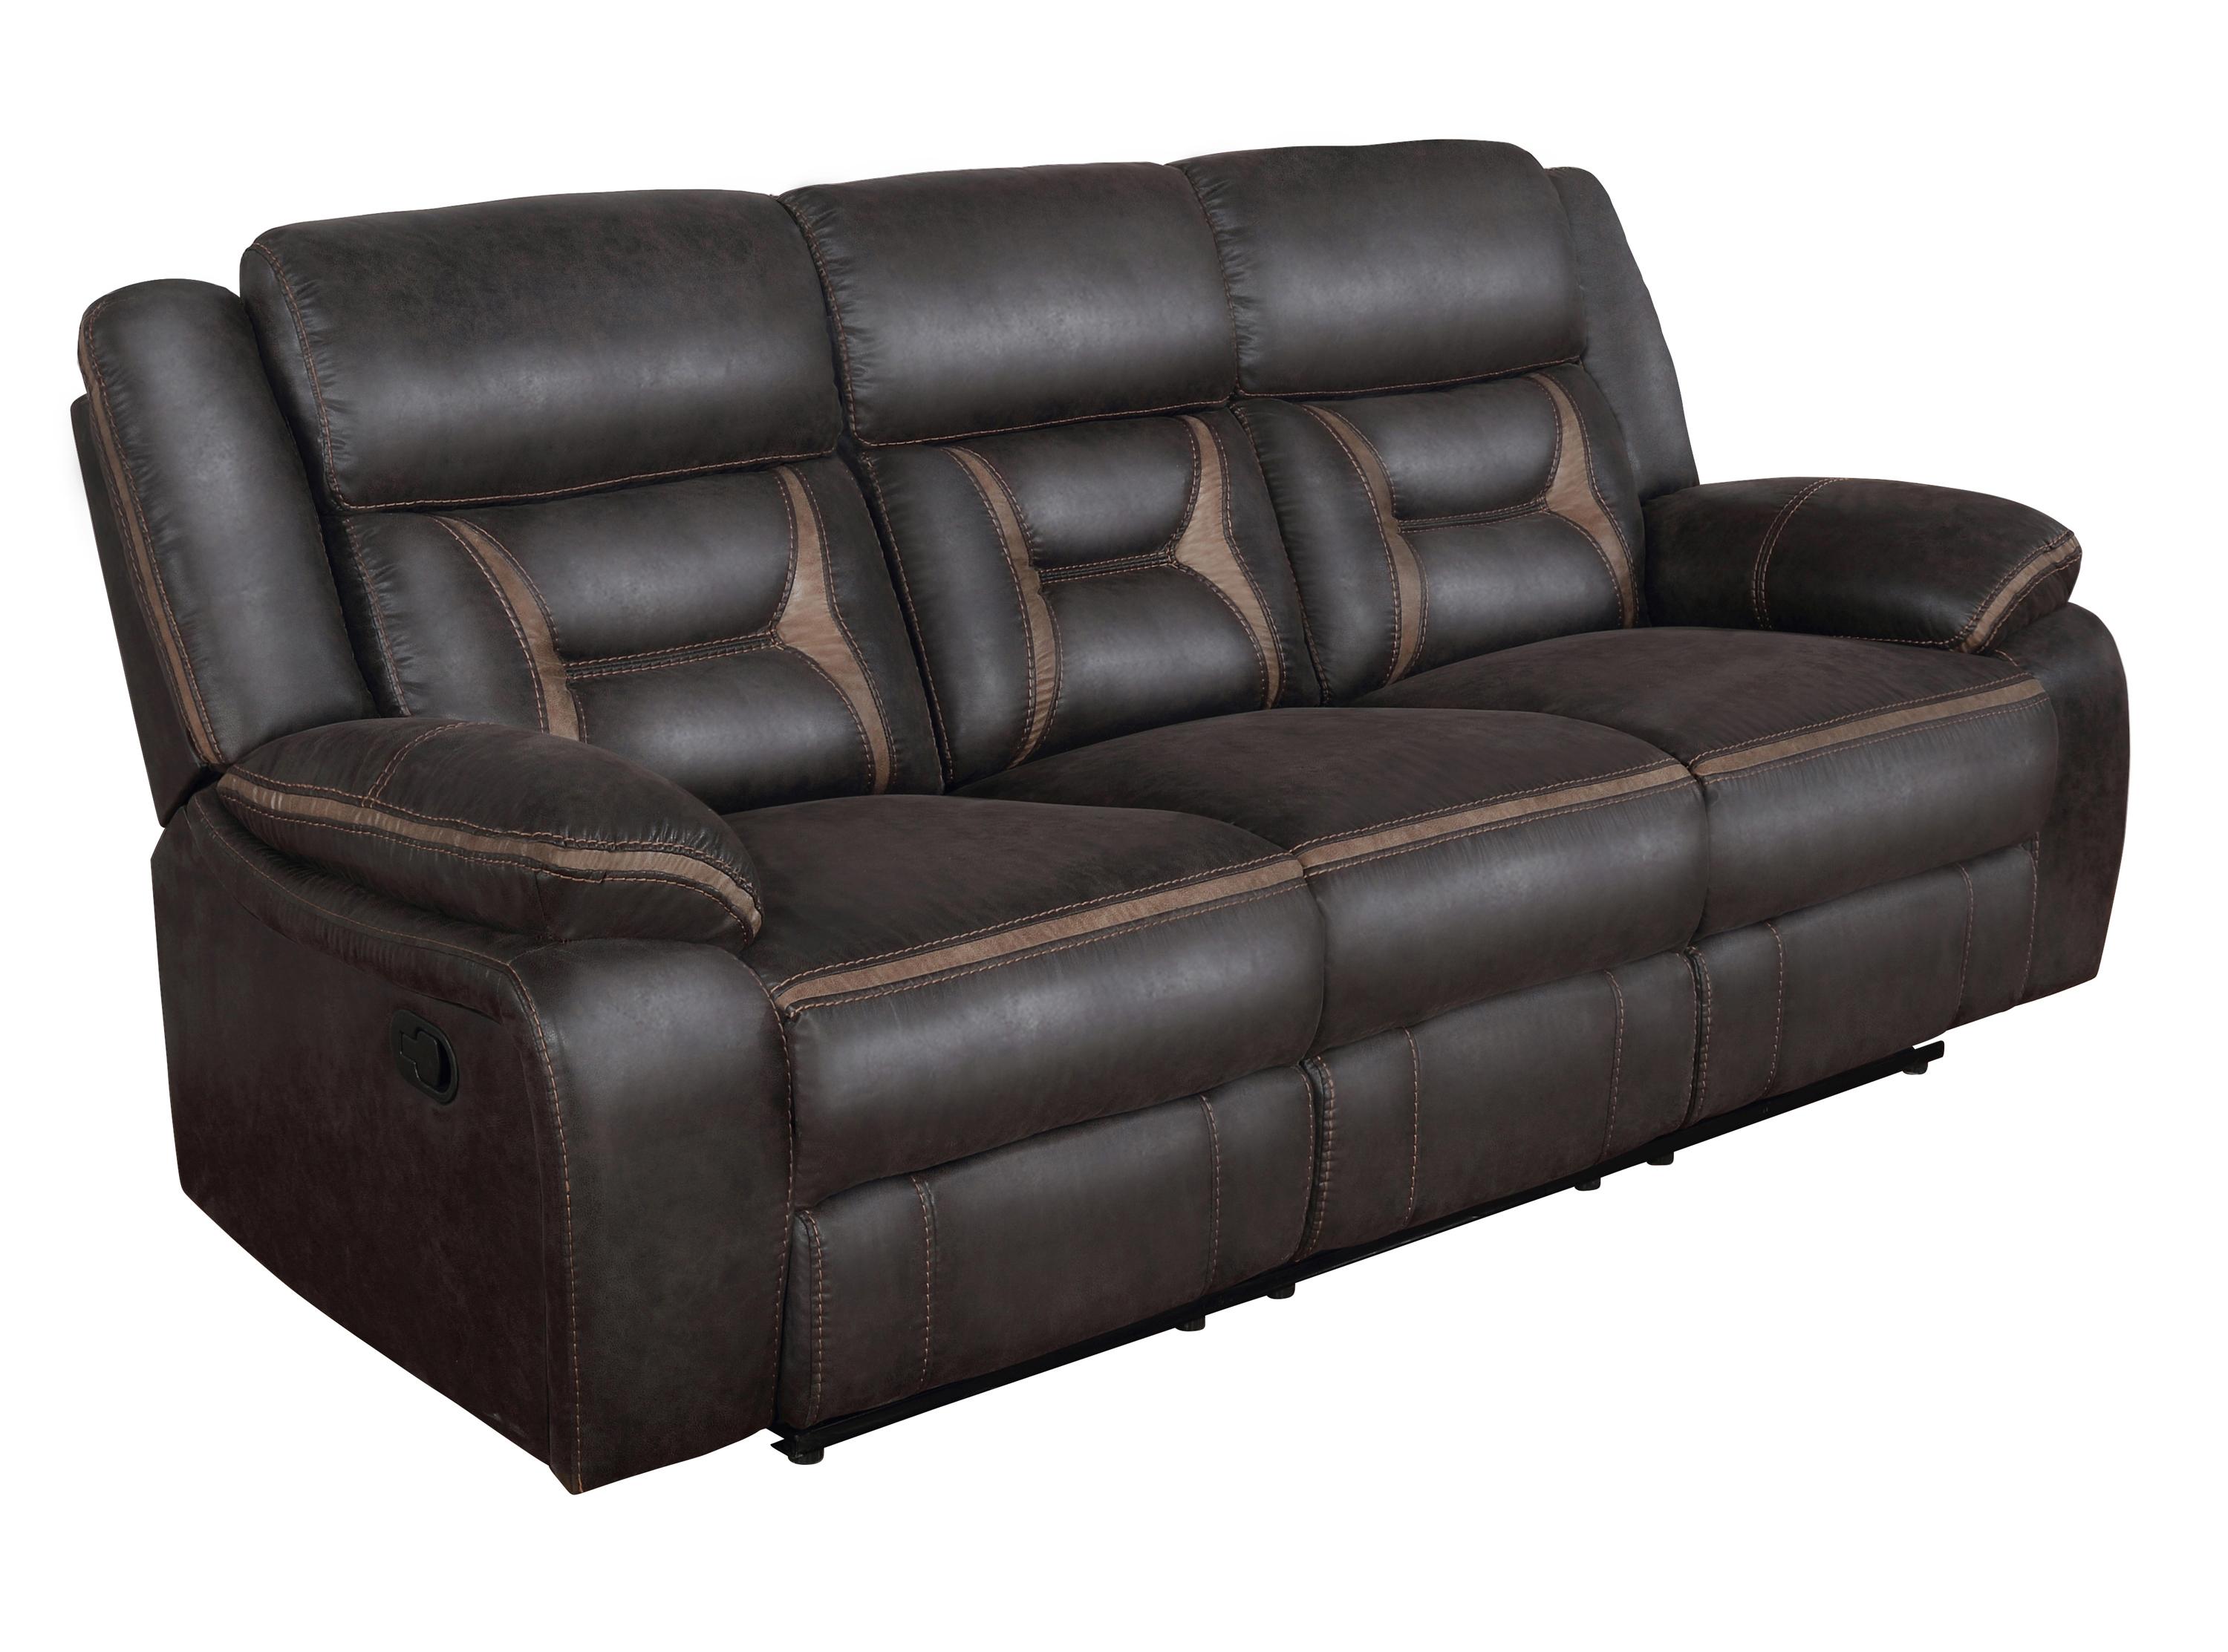 Transitional Motion Sofa 651354 Greer 651354 in Dark Brown Leatherette